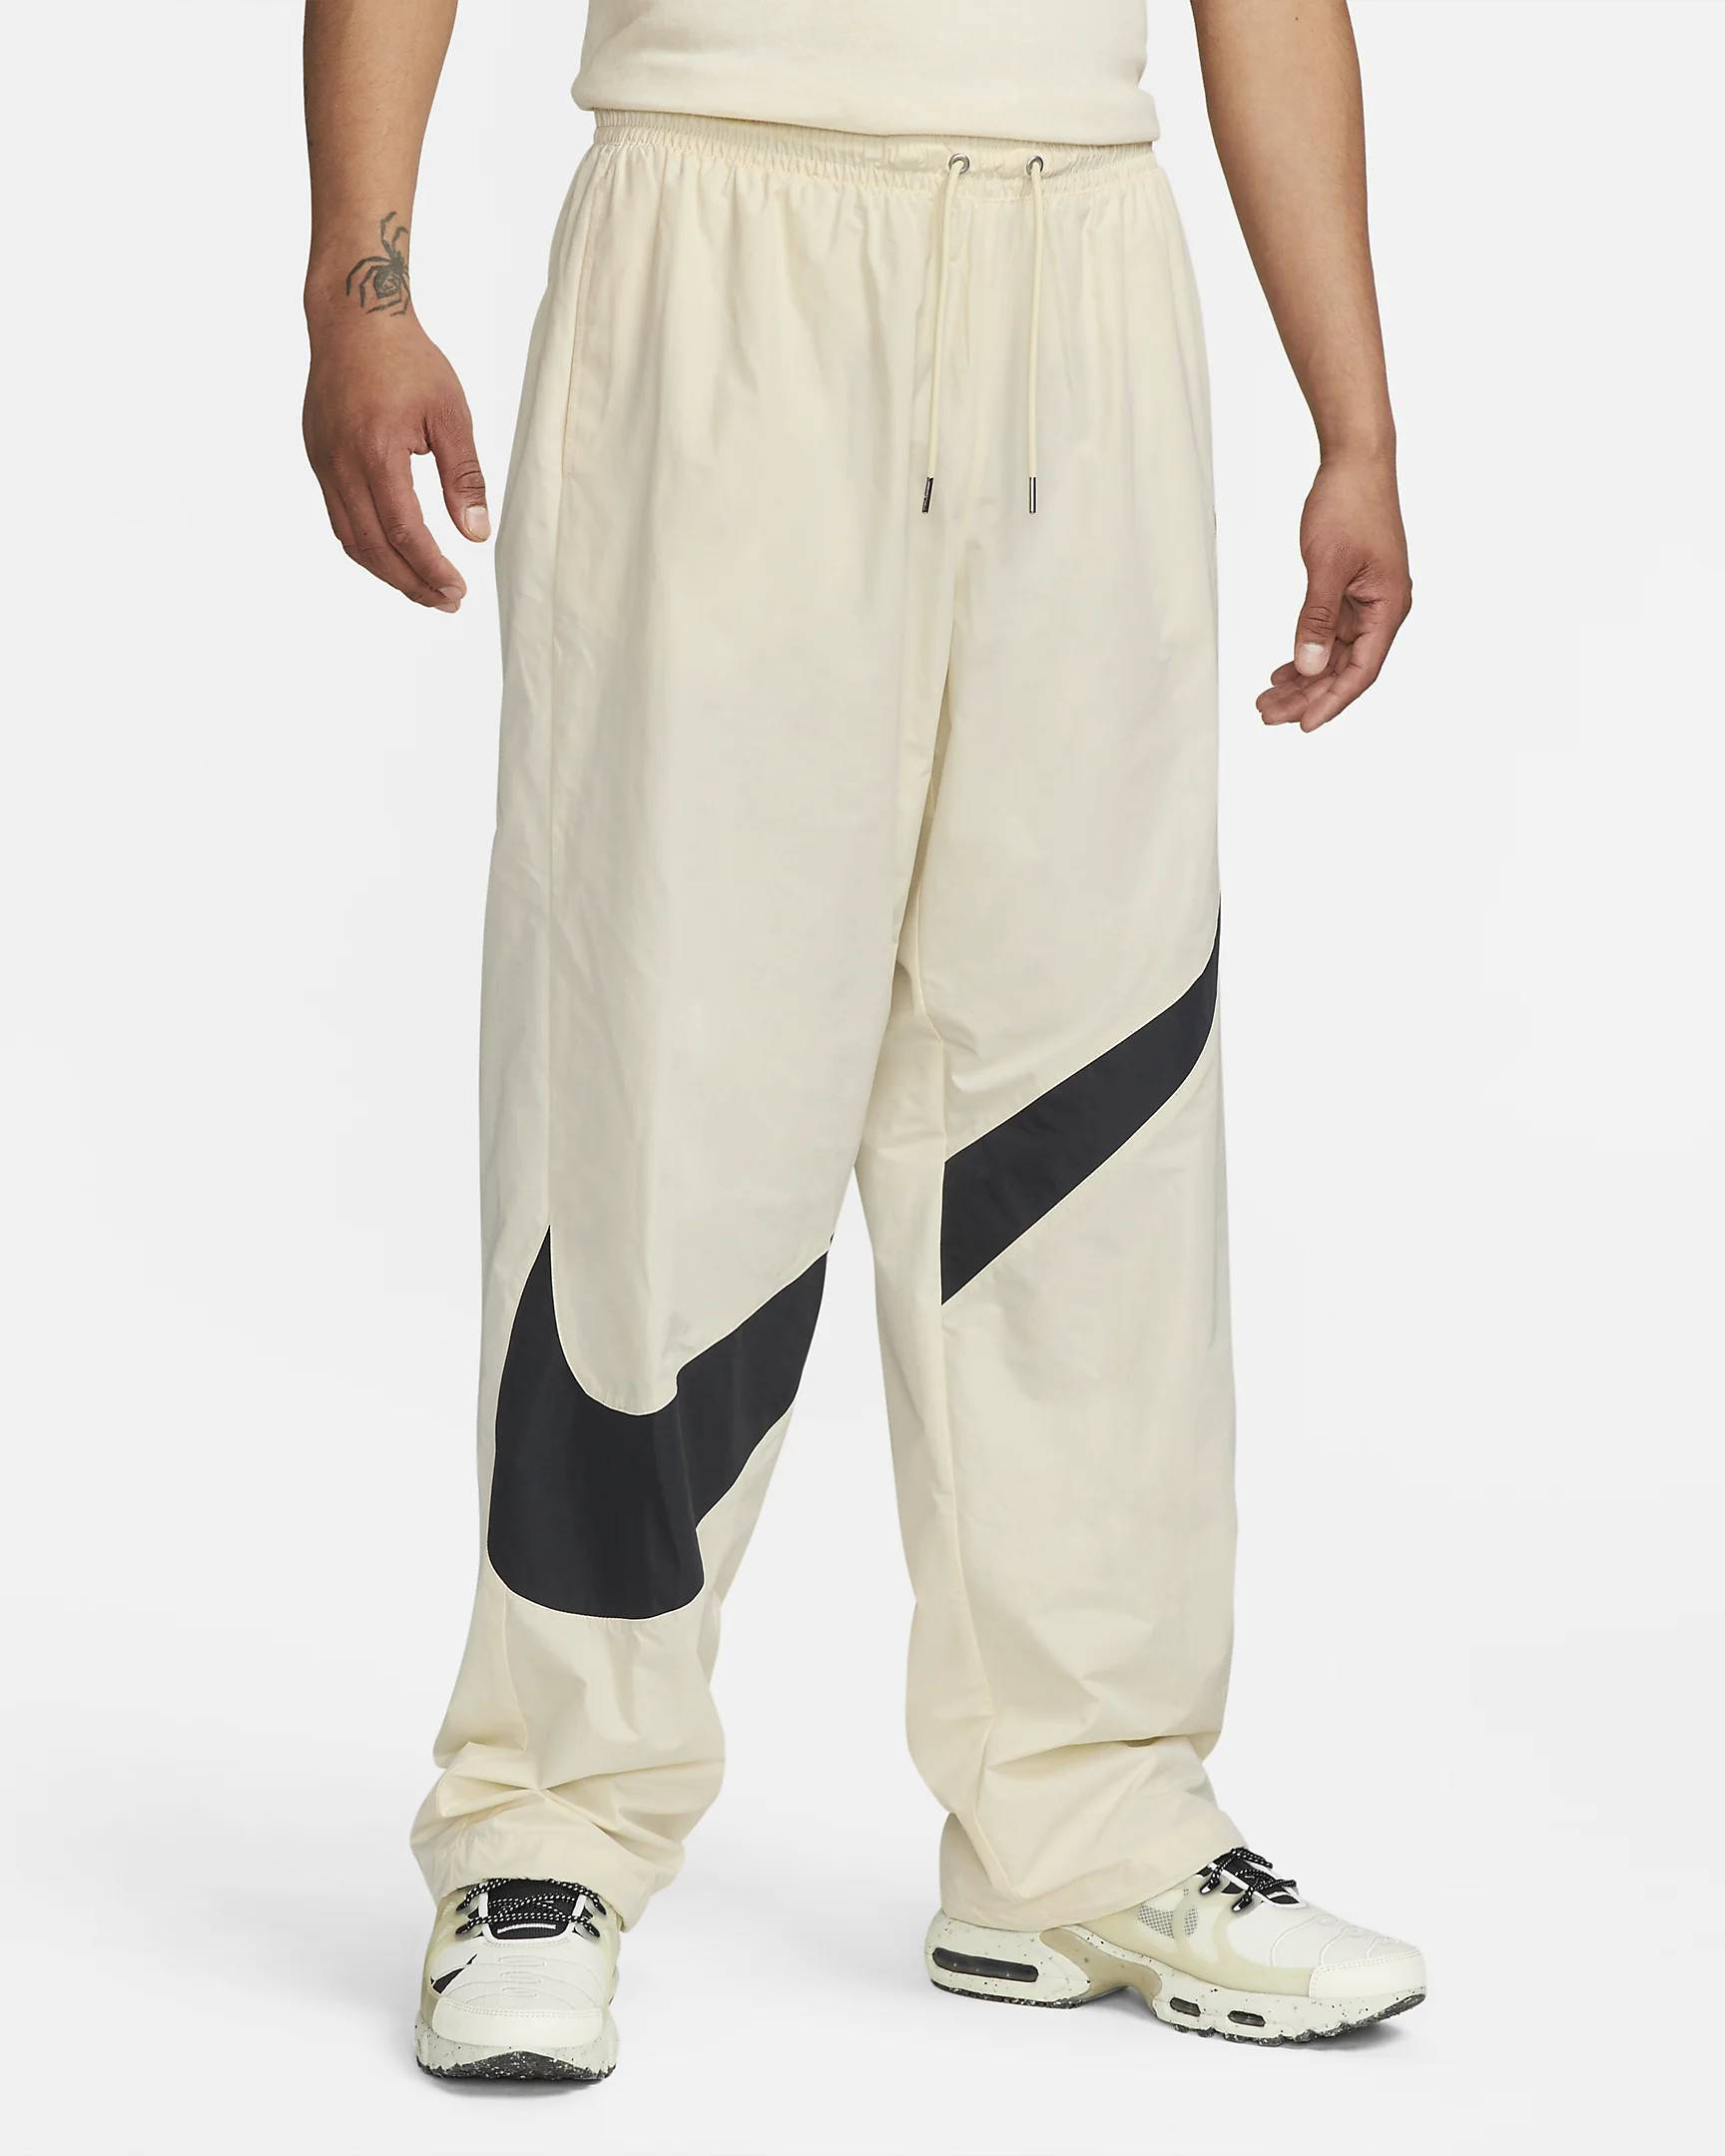 Nike Swoosh Woven Trousers | Where To Buy | FB7880-010 | The Sole